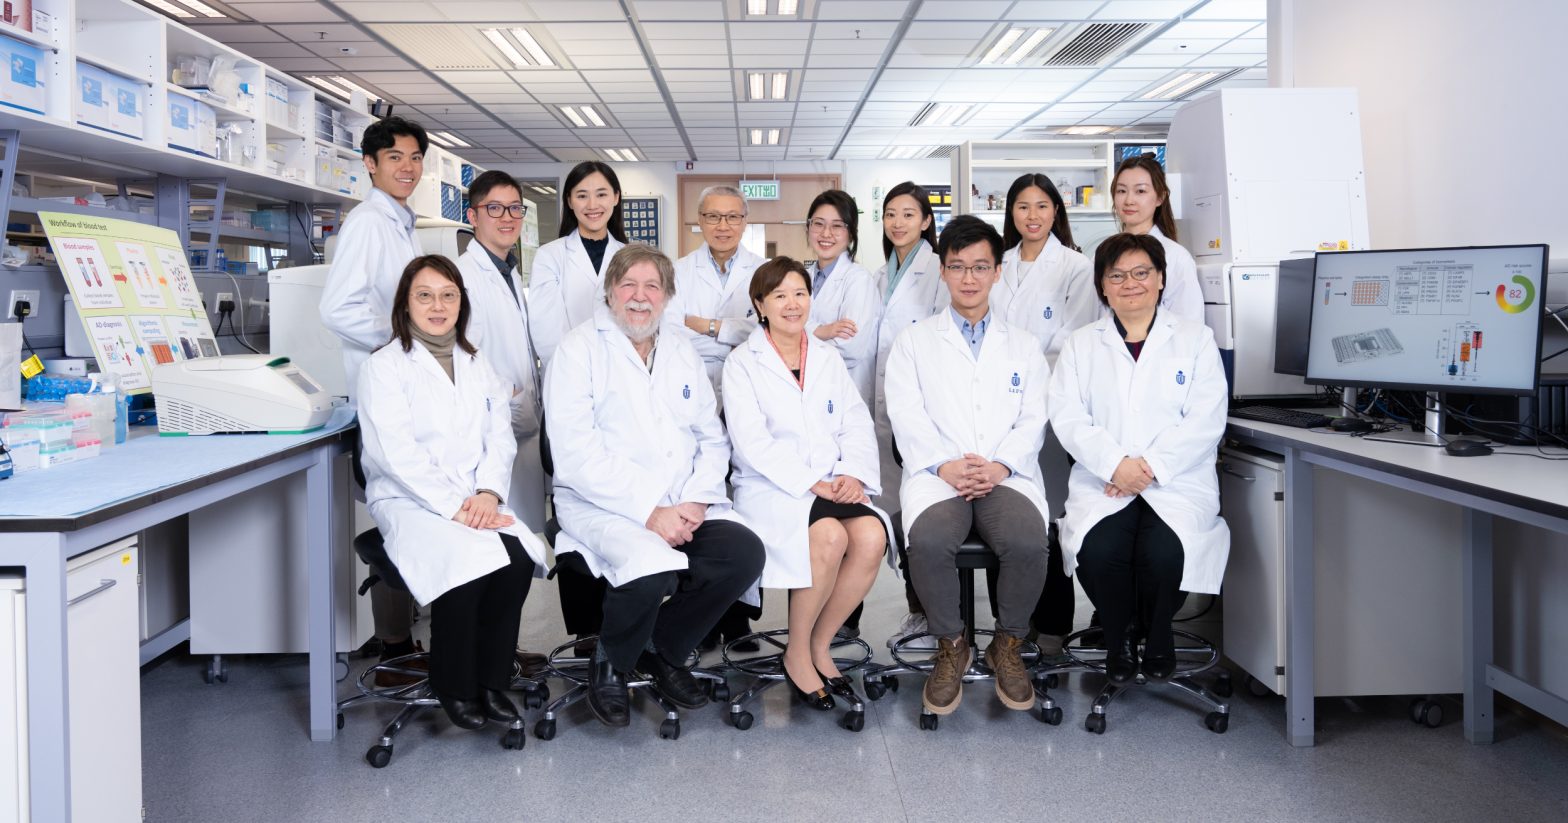 The photo of the research team, including HKUST President Prof. Nancy IP (center, front row), UCL Chair of the Molecular Biology of Neurological Disease Prof. John HARDY (second from left, front row), HKUST Division of Life Science Research Professor Prof. Amy FU (first from right, front row), HKCeND Chief Scientific Officer Dr. Fanny IP (first from left, front row), HKCeND Clinical Research Fellow Dr. MOK Kin-Ying (forth from left, back row), and the first author of the research paper Dr. Jason JIANG Yuanbing (second from right, front row) with other research team members